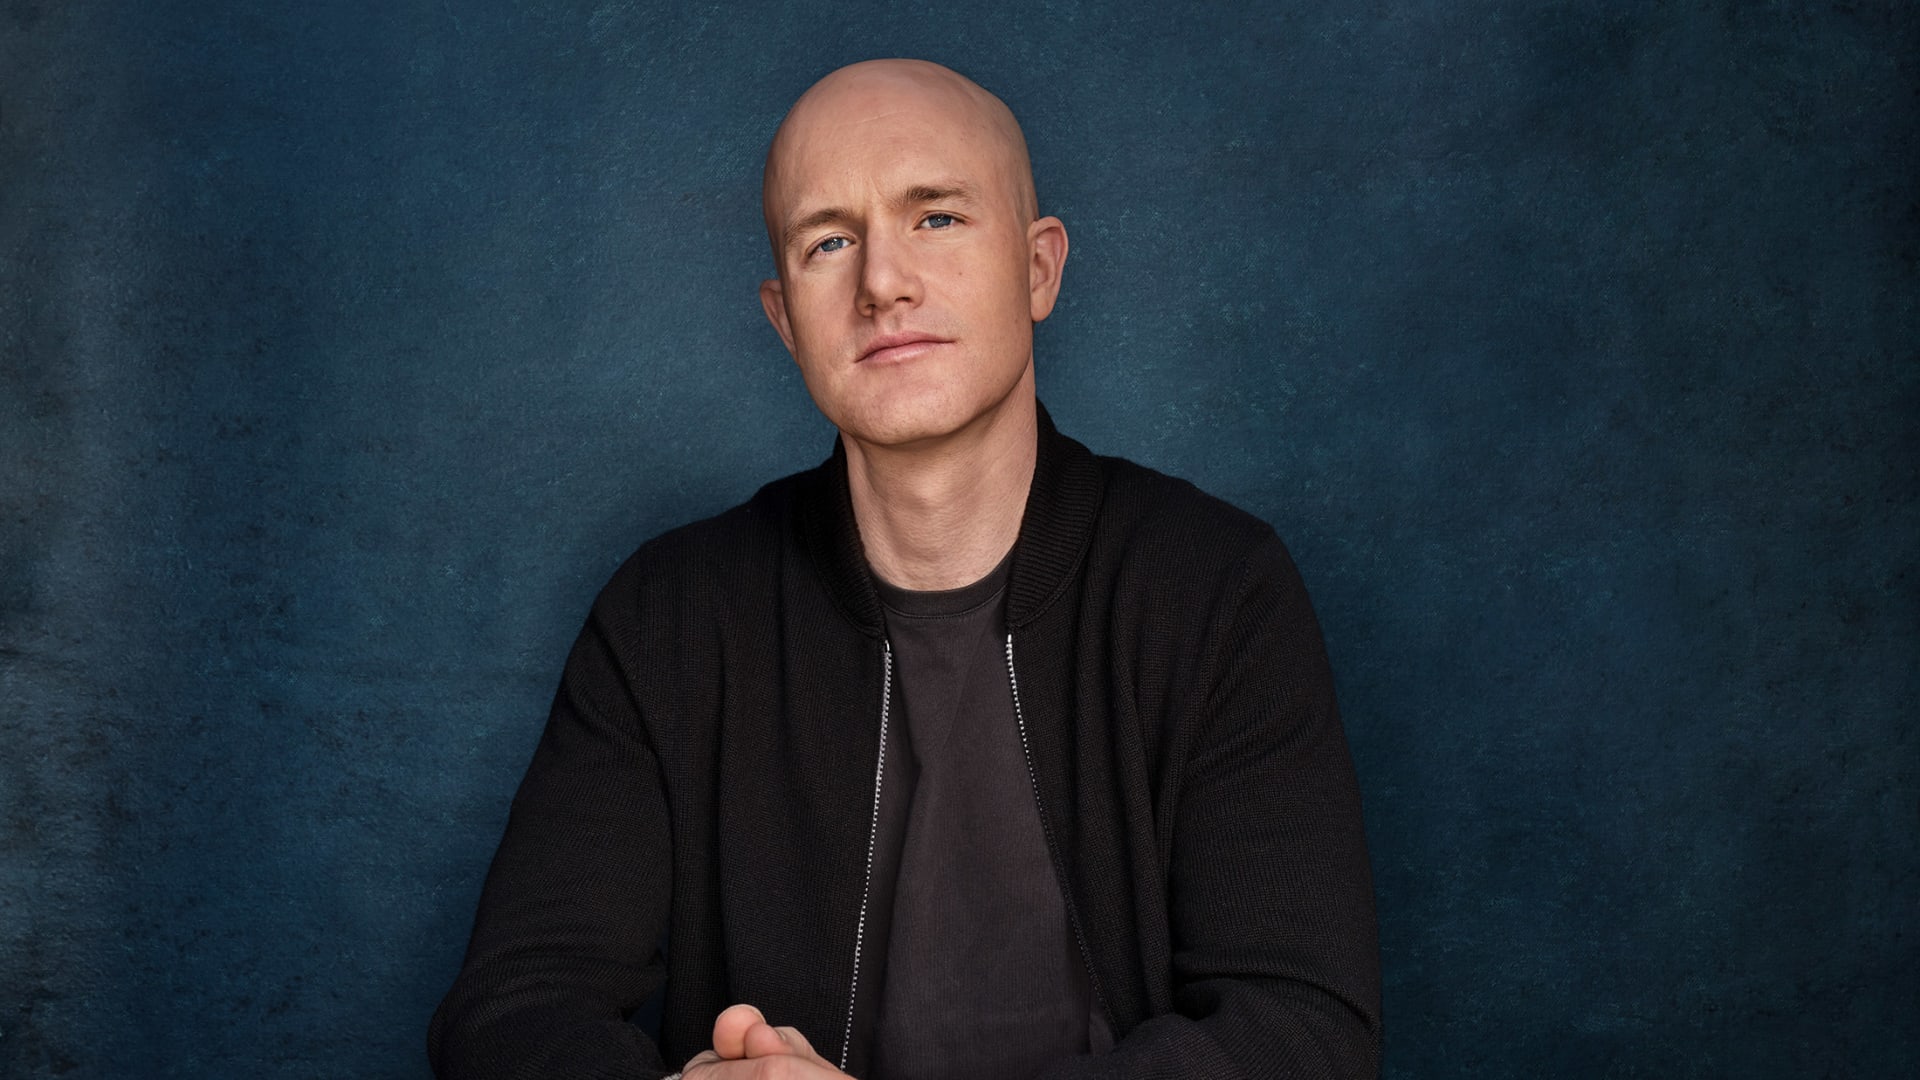 While large financial institutions are beginning to make their way into crypto, Coinbase CEO Brian Armstrong (pictured) thinks the floodgates are opening. “Every major bank and financial service firm is going to do something with crypto eventually; it’s just too big a piece of the economy.”